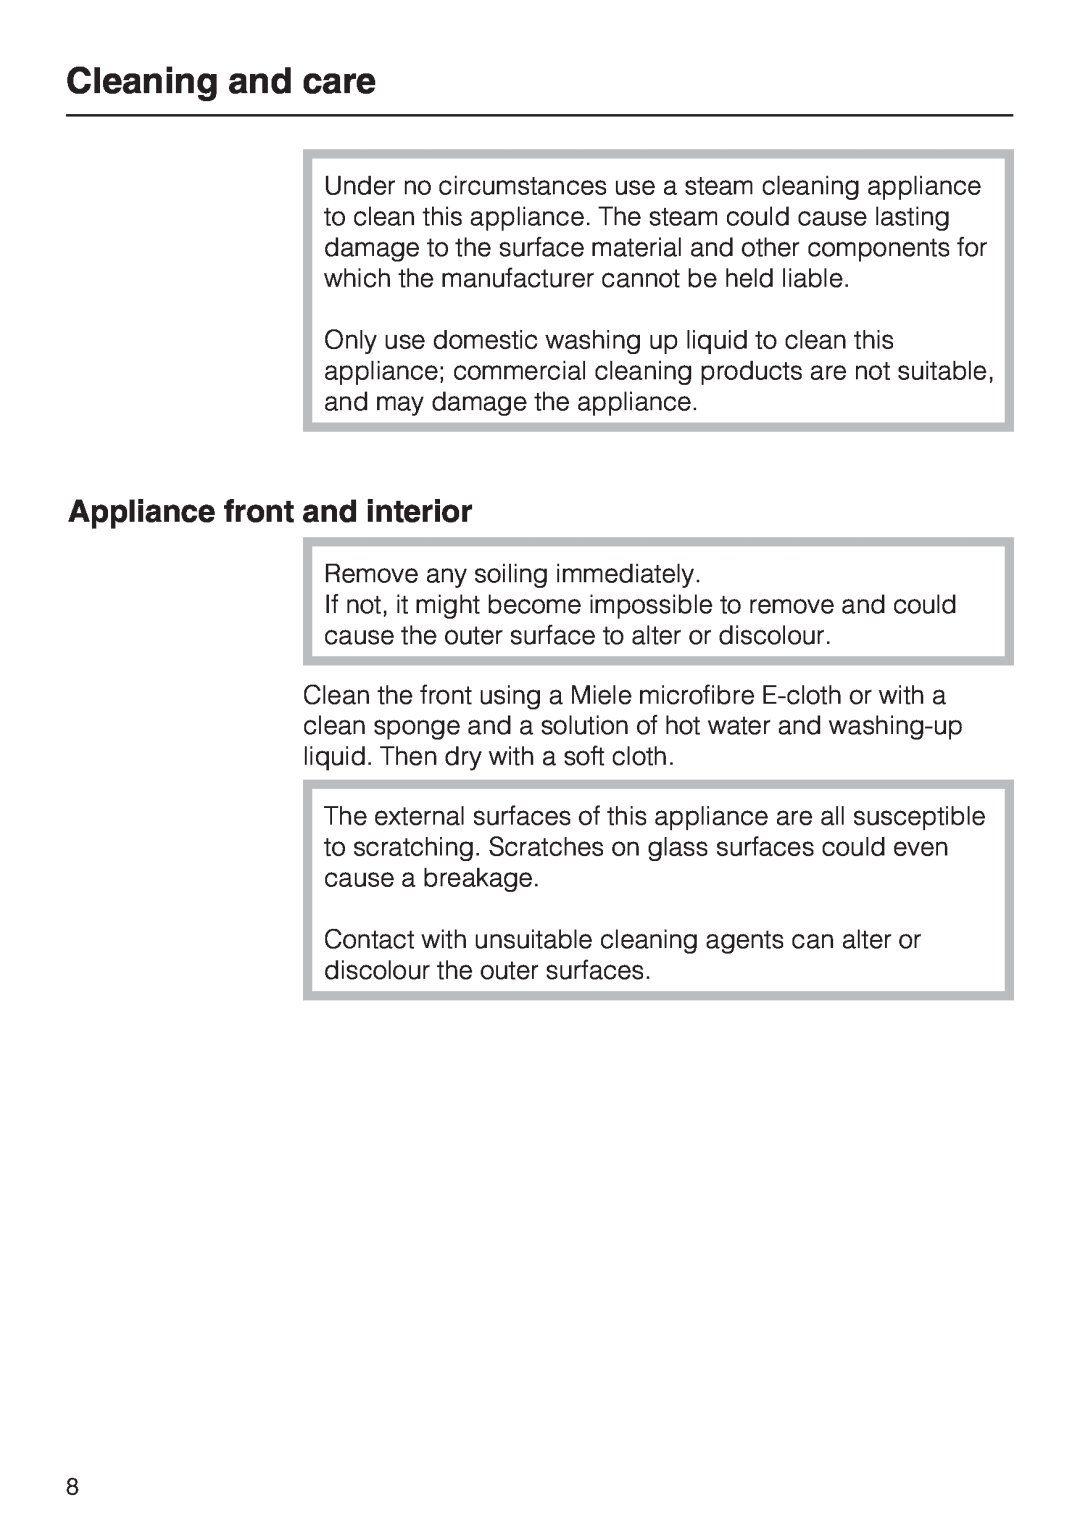 Miele ESS 3060-10 installation instructions Cleaning and care, Appliance front and interior 